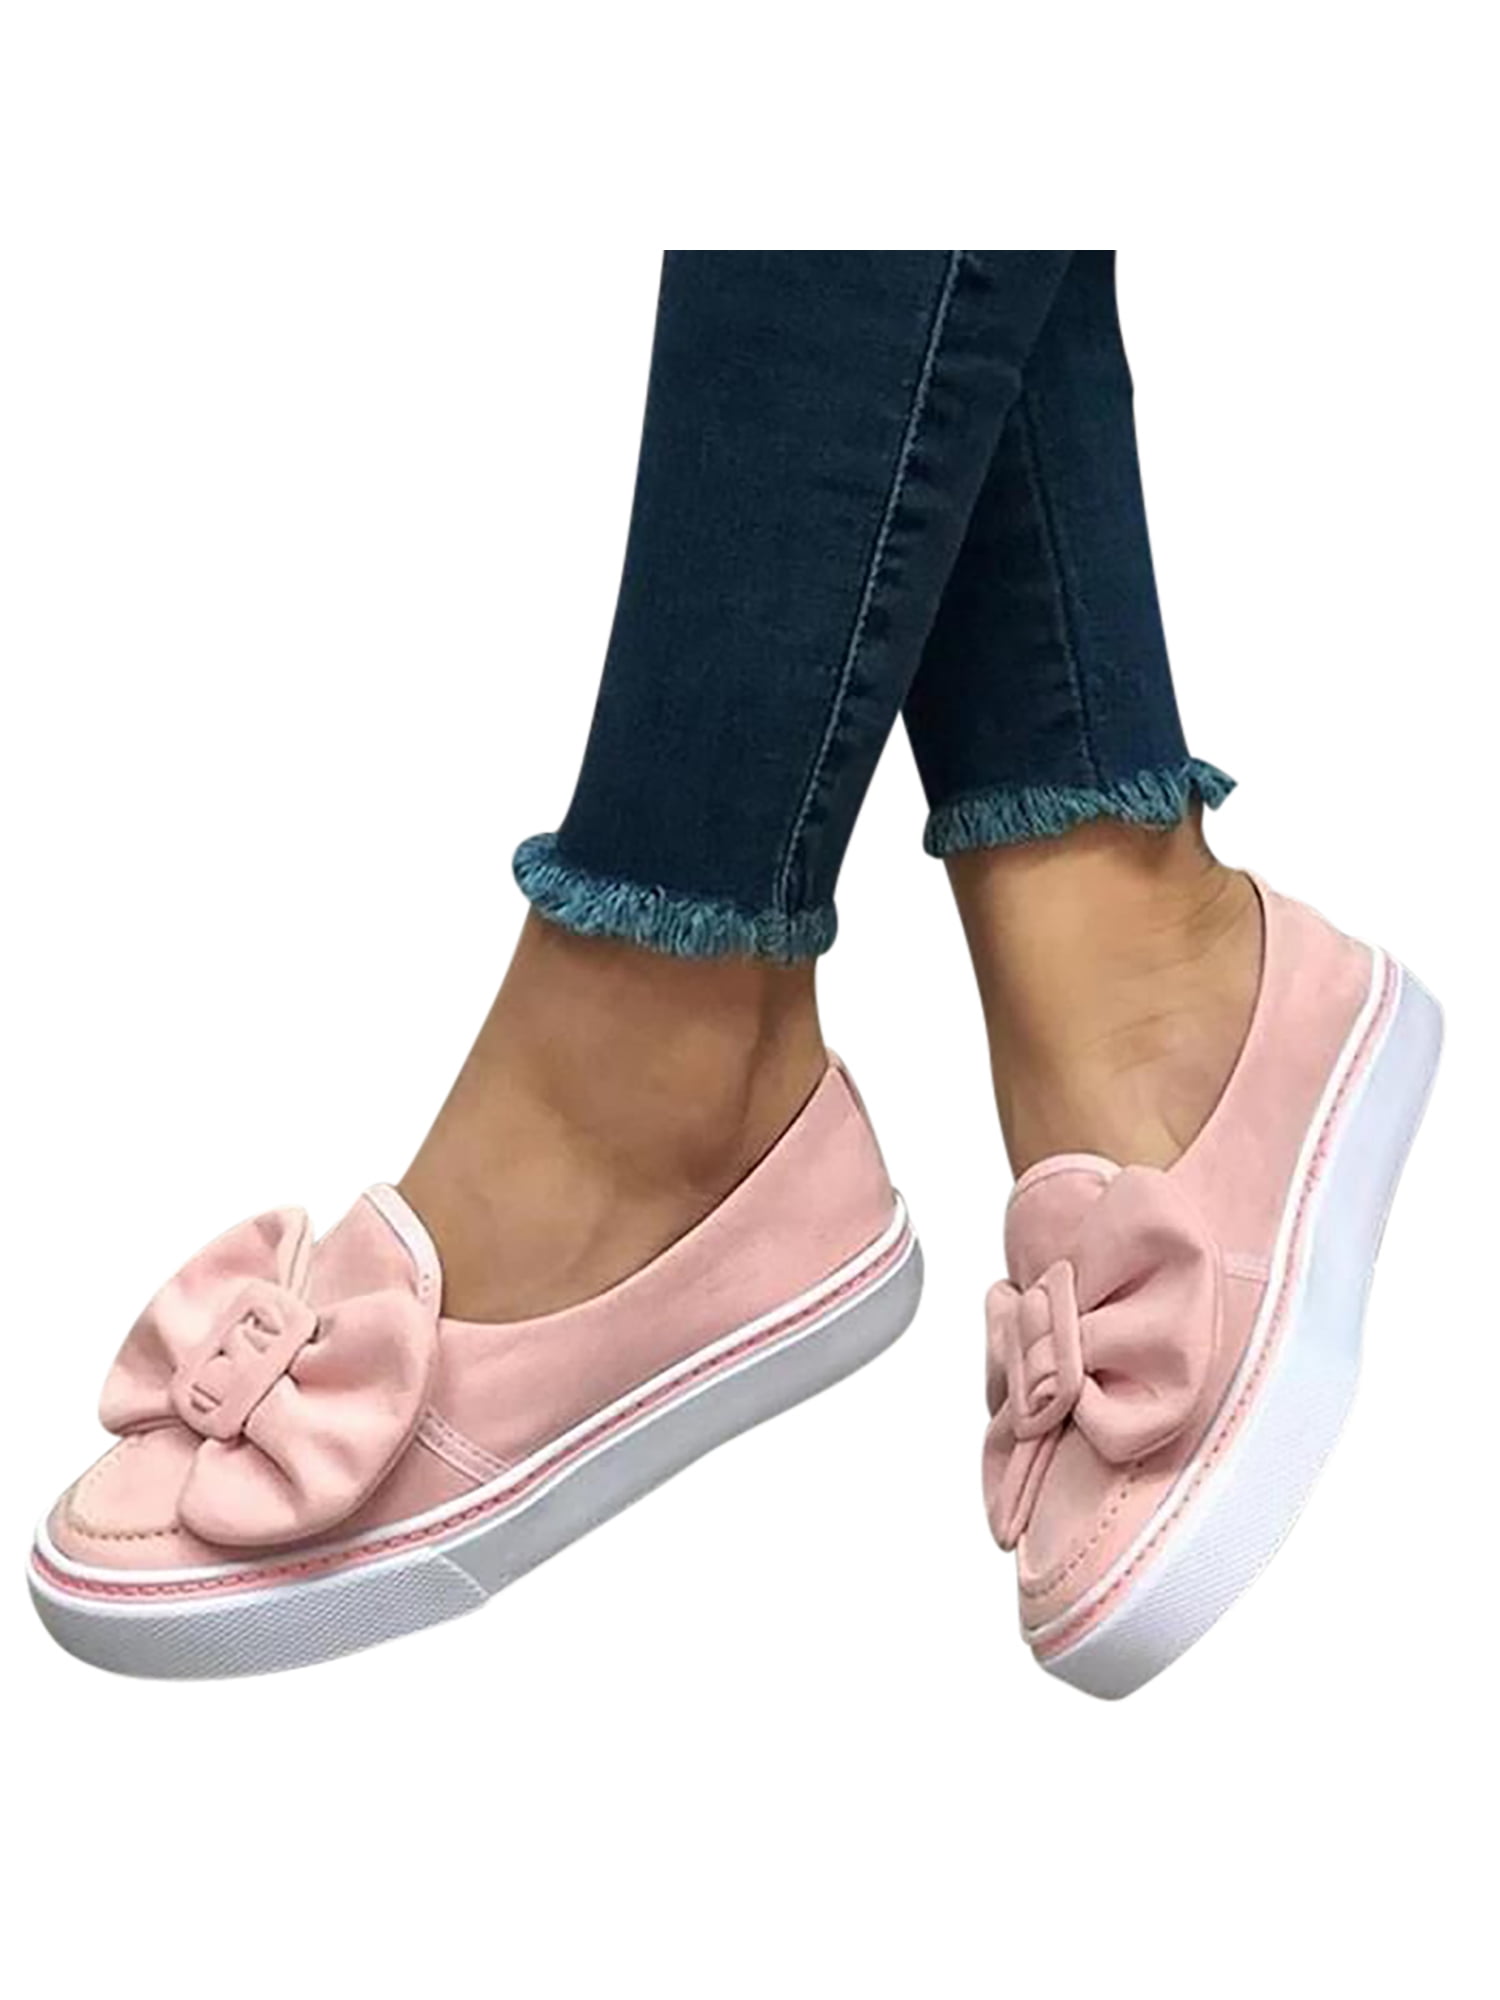 Womens Slip on Shoes Canvas Loafers Fashion Casual Sneakers